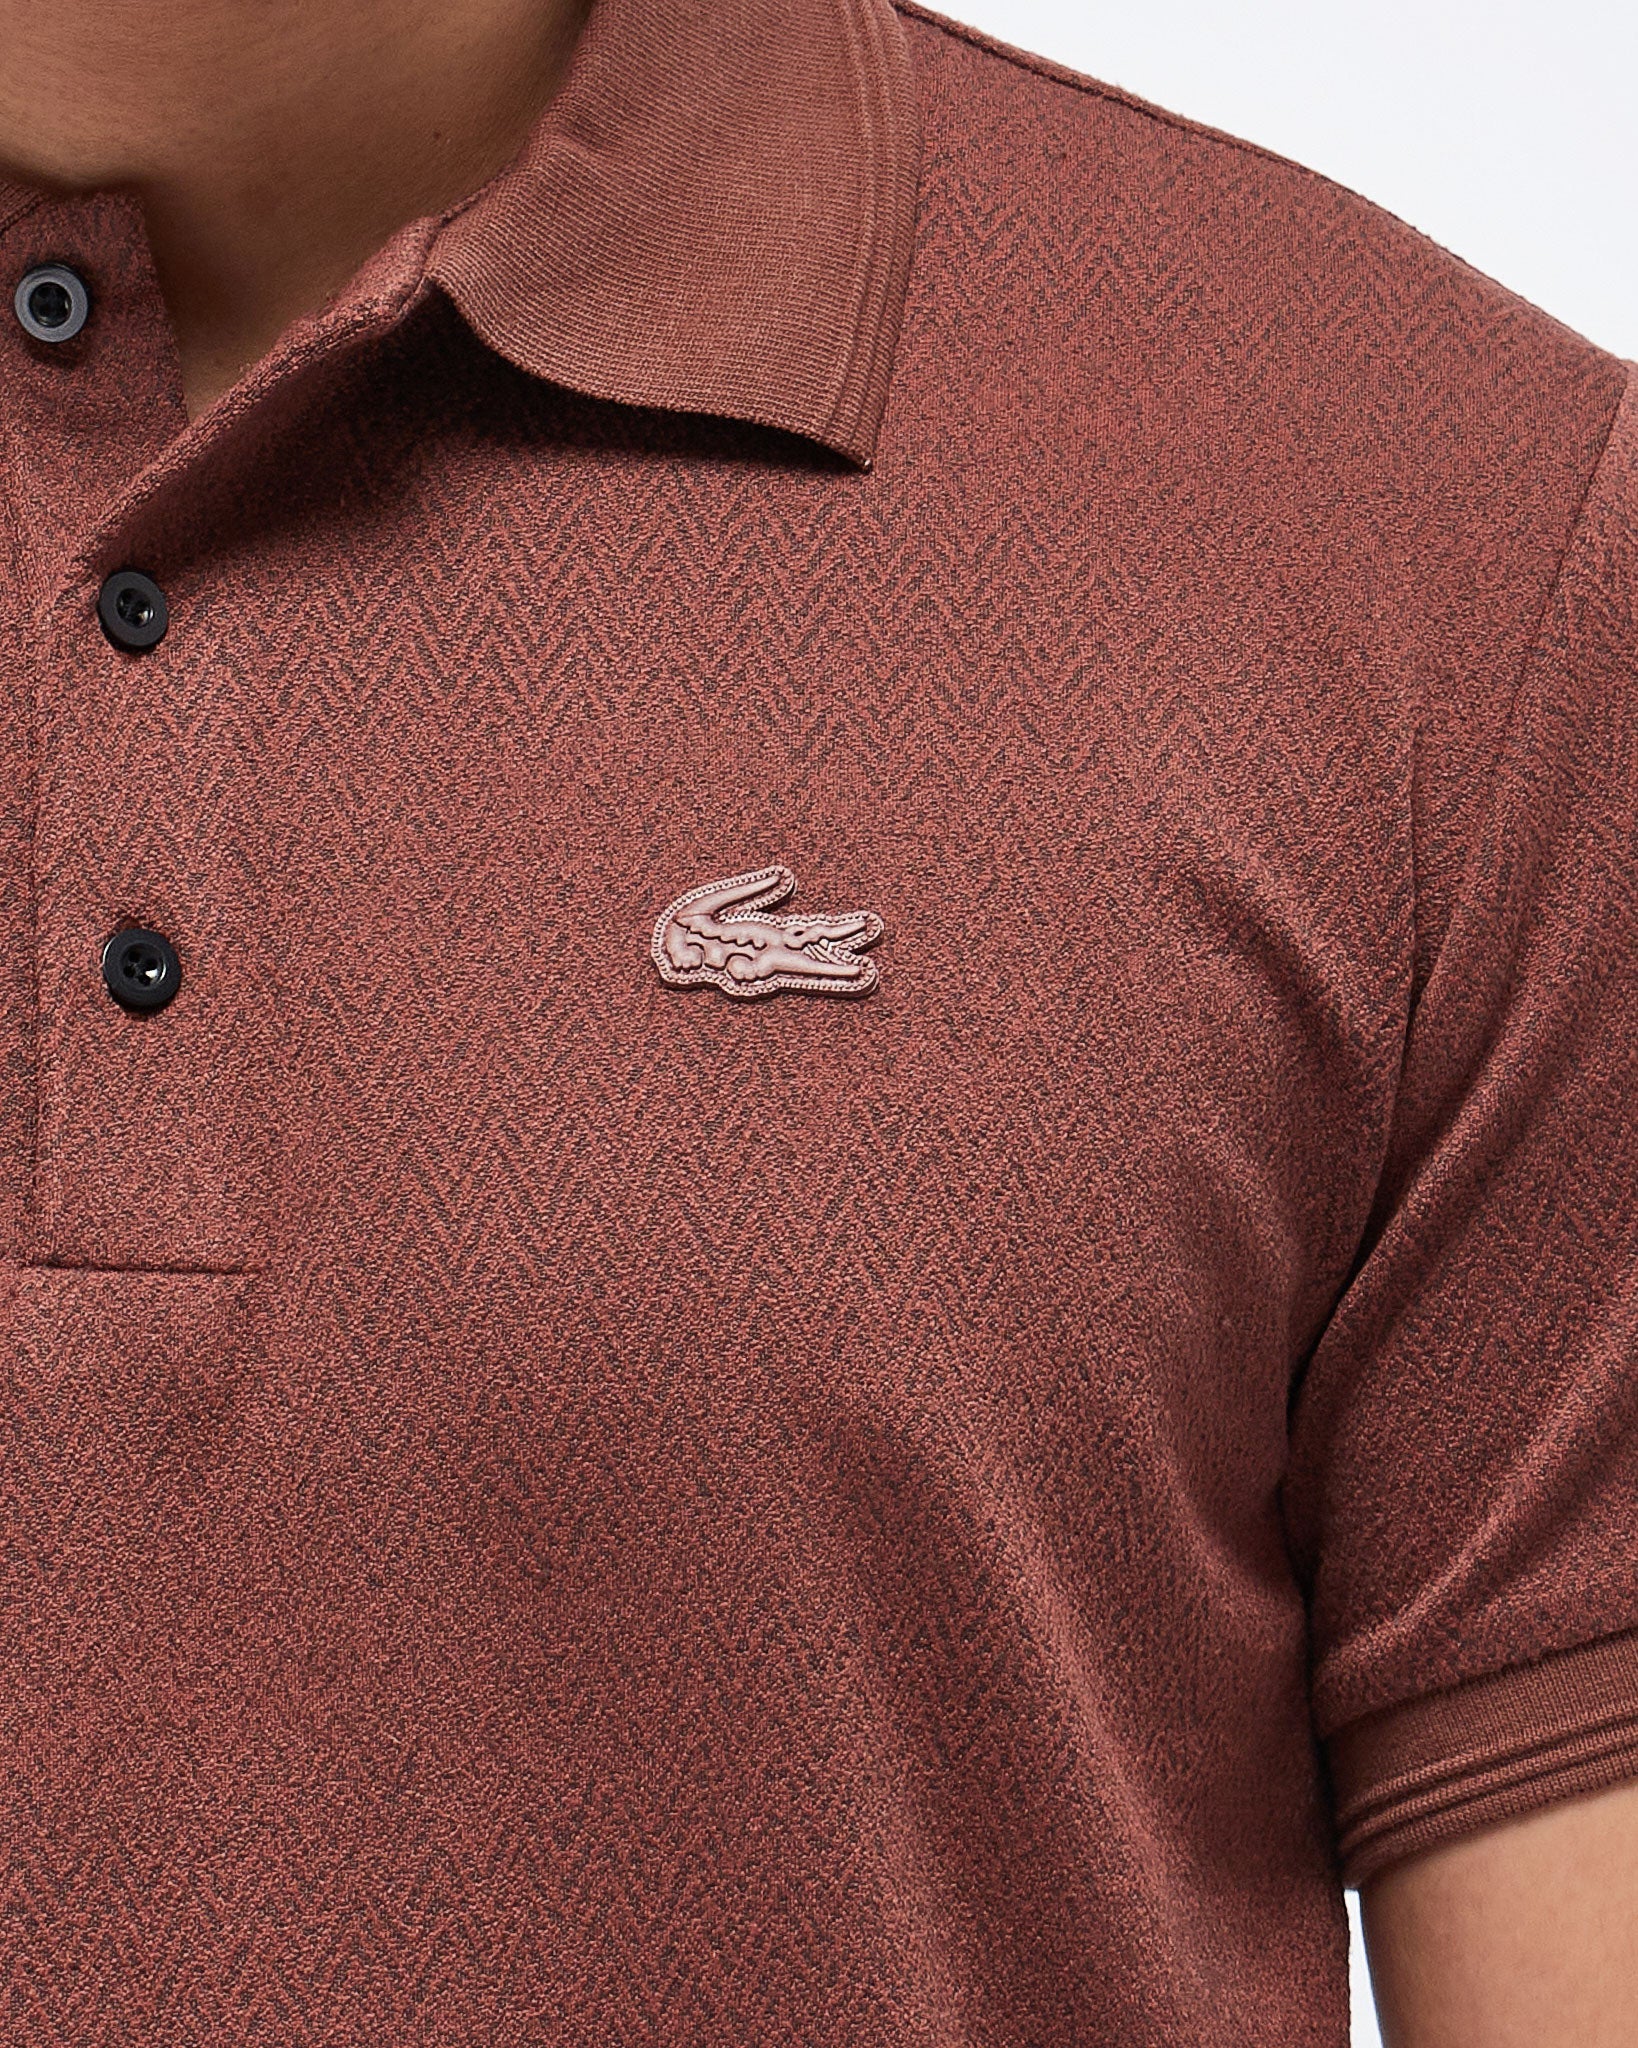 MOI OUTFIT-Texture Pattern Logo Embroidered Men Polo Shirt 18.90